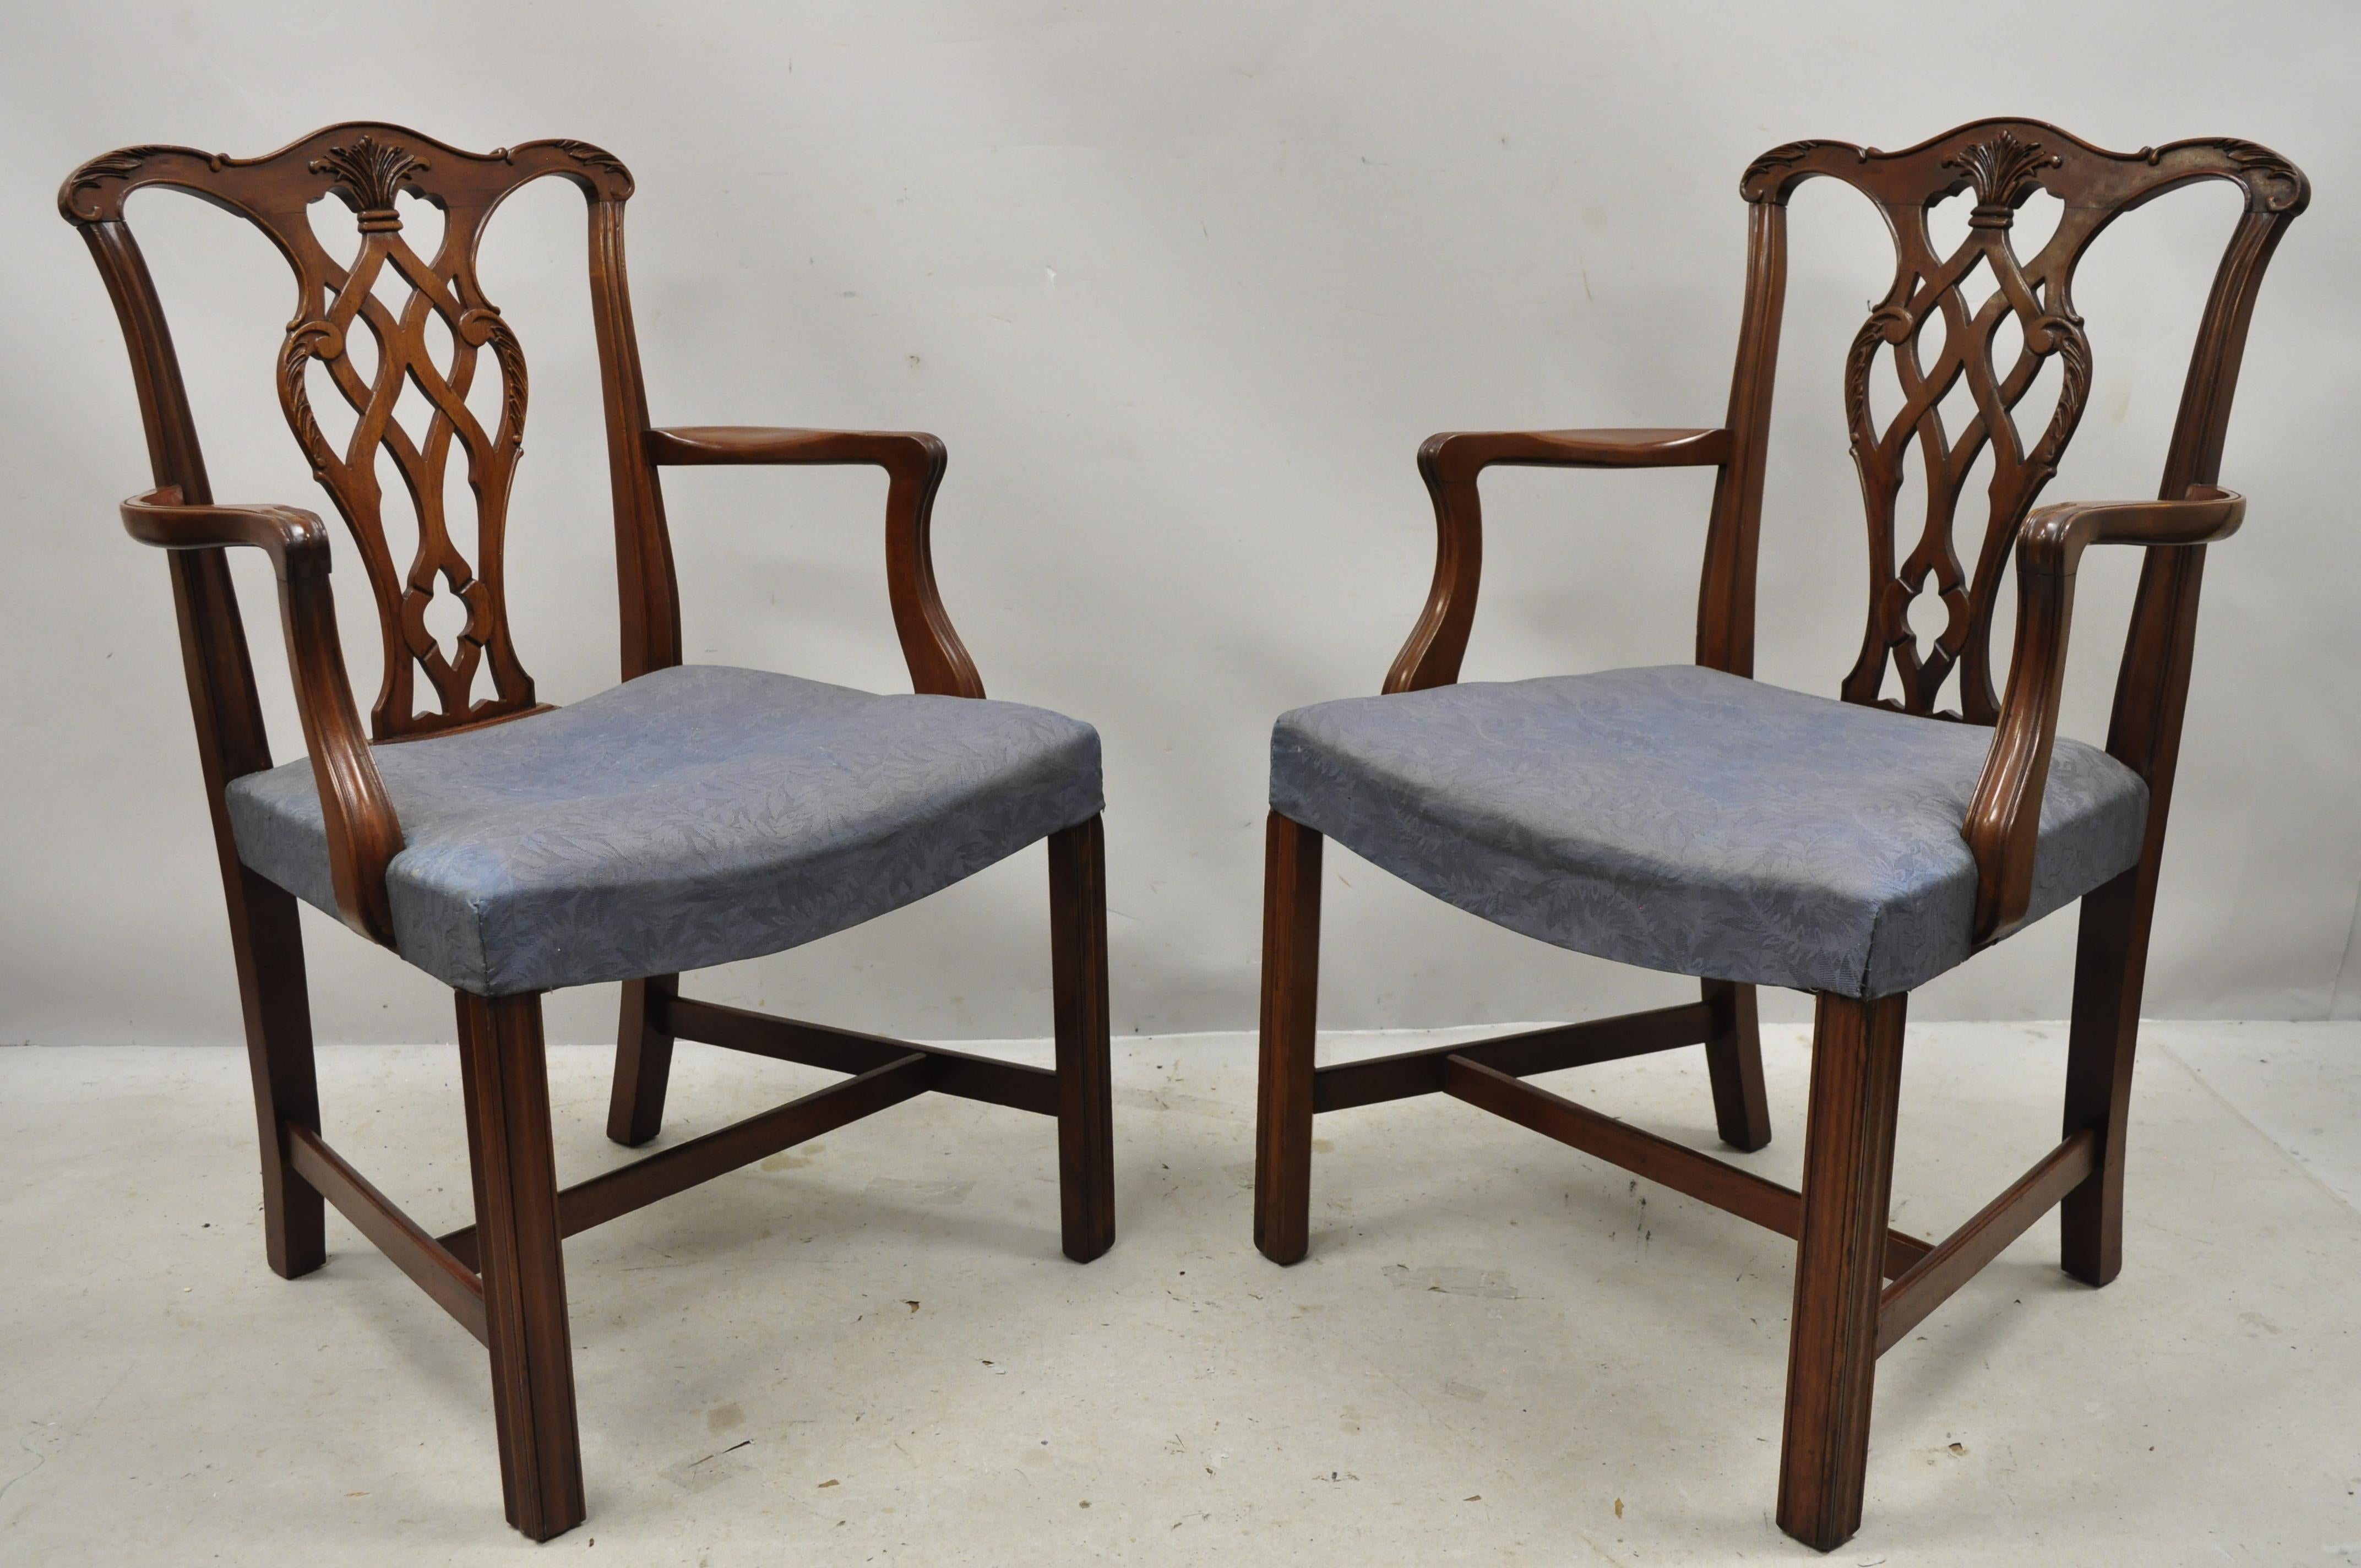 Vintage Georgian Chippendale carved mahogany dining captains armchairs, pair B. Item features solid wood frame, beautiful wood grain, nicely carved details, very nice antique item, circa early to mid-20th century. Measurements: 37.5